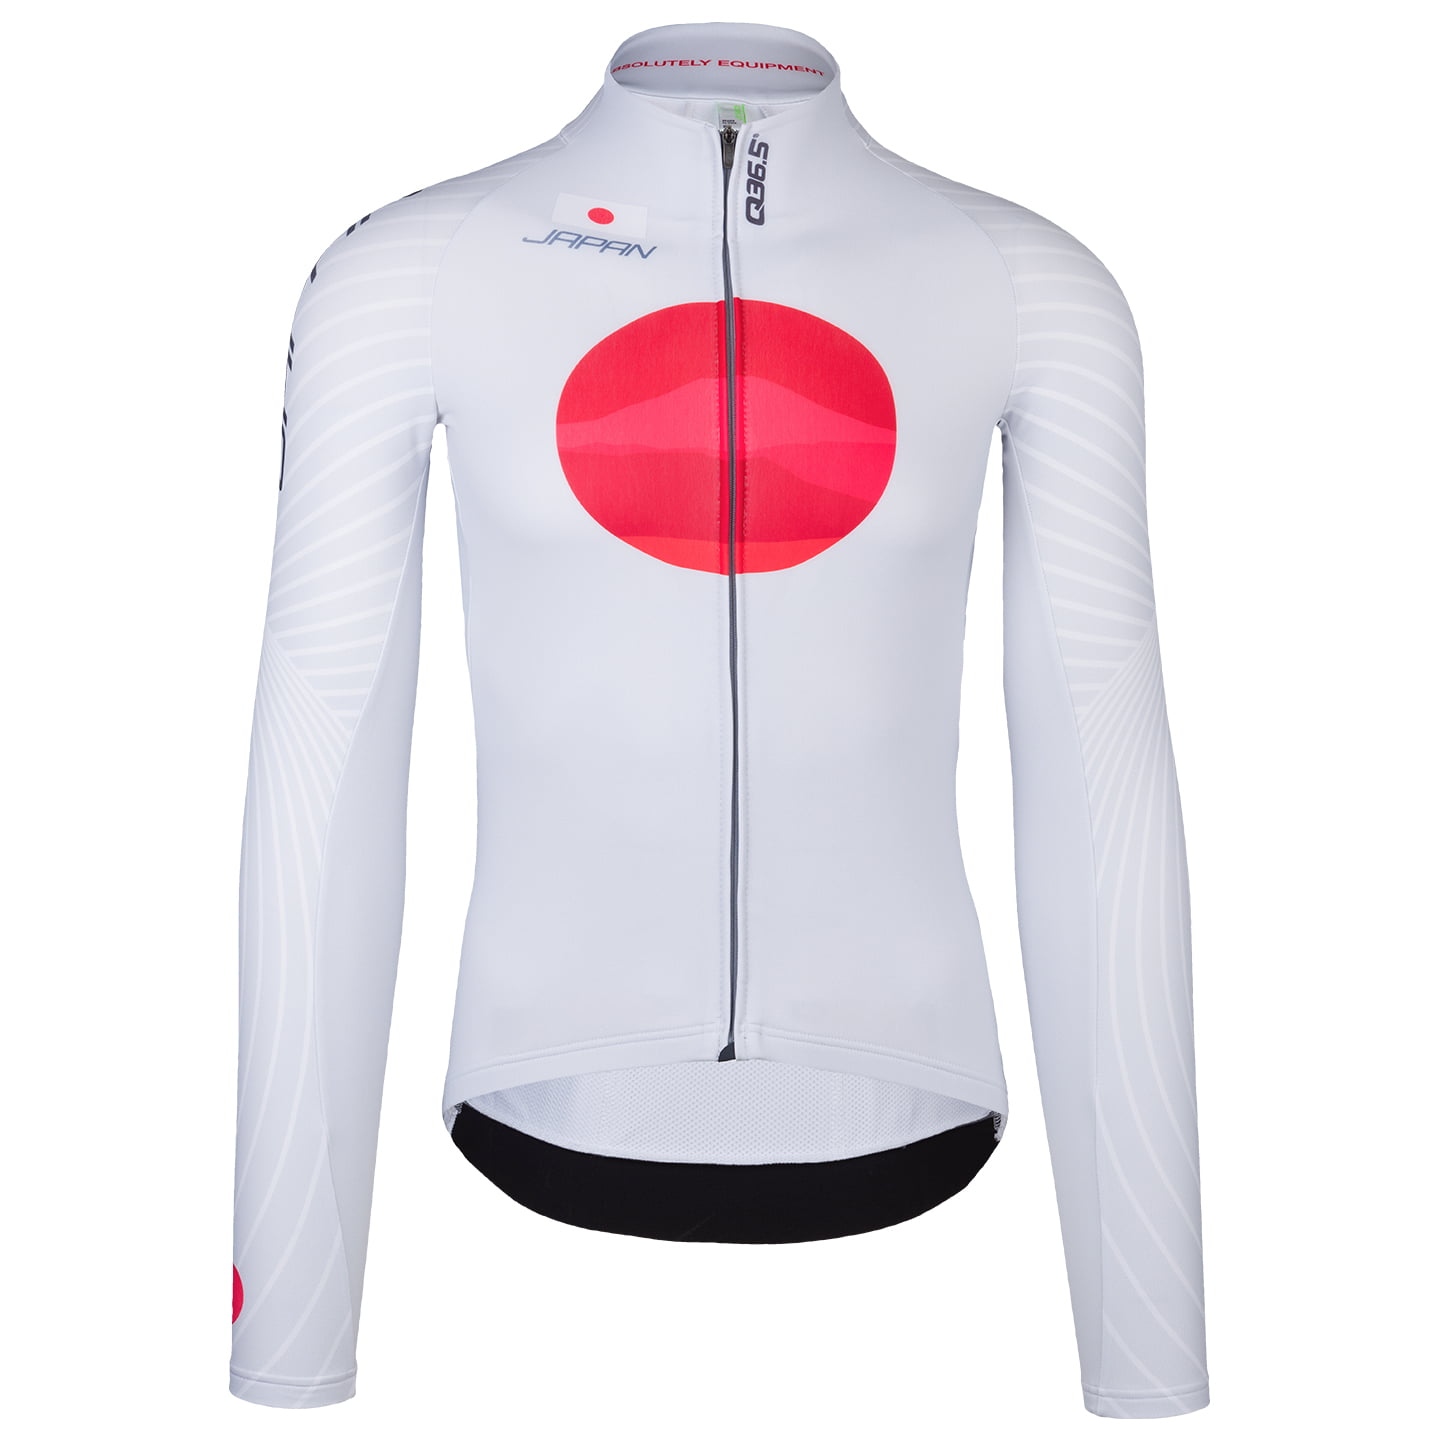 JAPANESE NATIONAL 2024 Long Sleeve Jersey, for men, size L, Cycling shirt, Cycle clothing